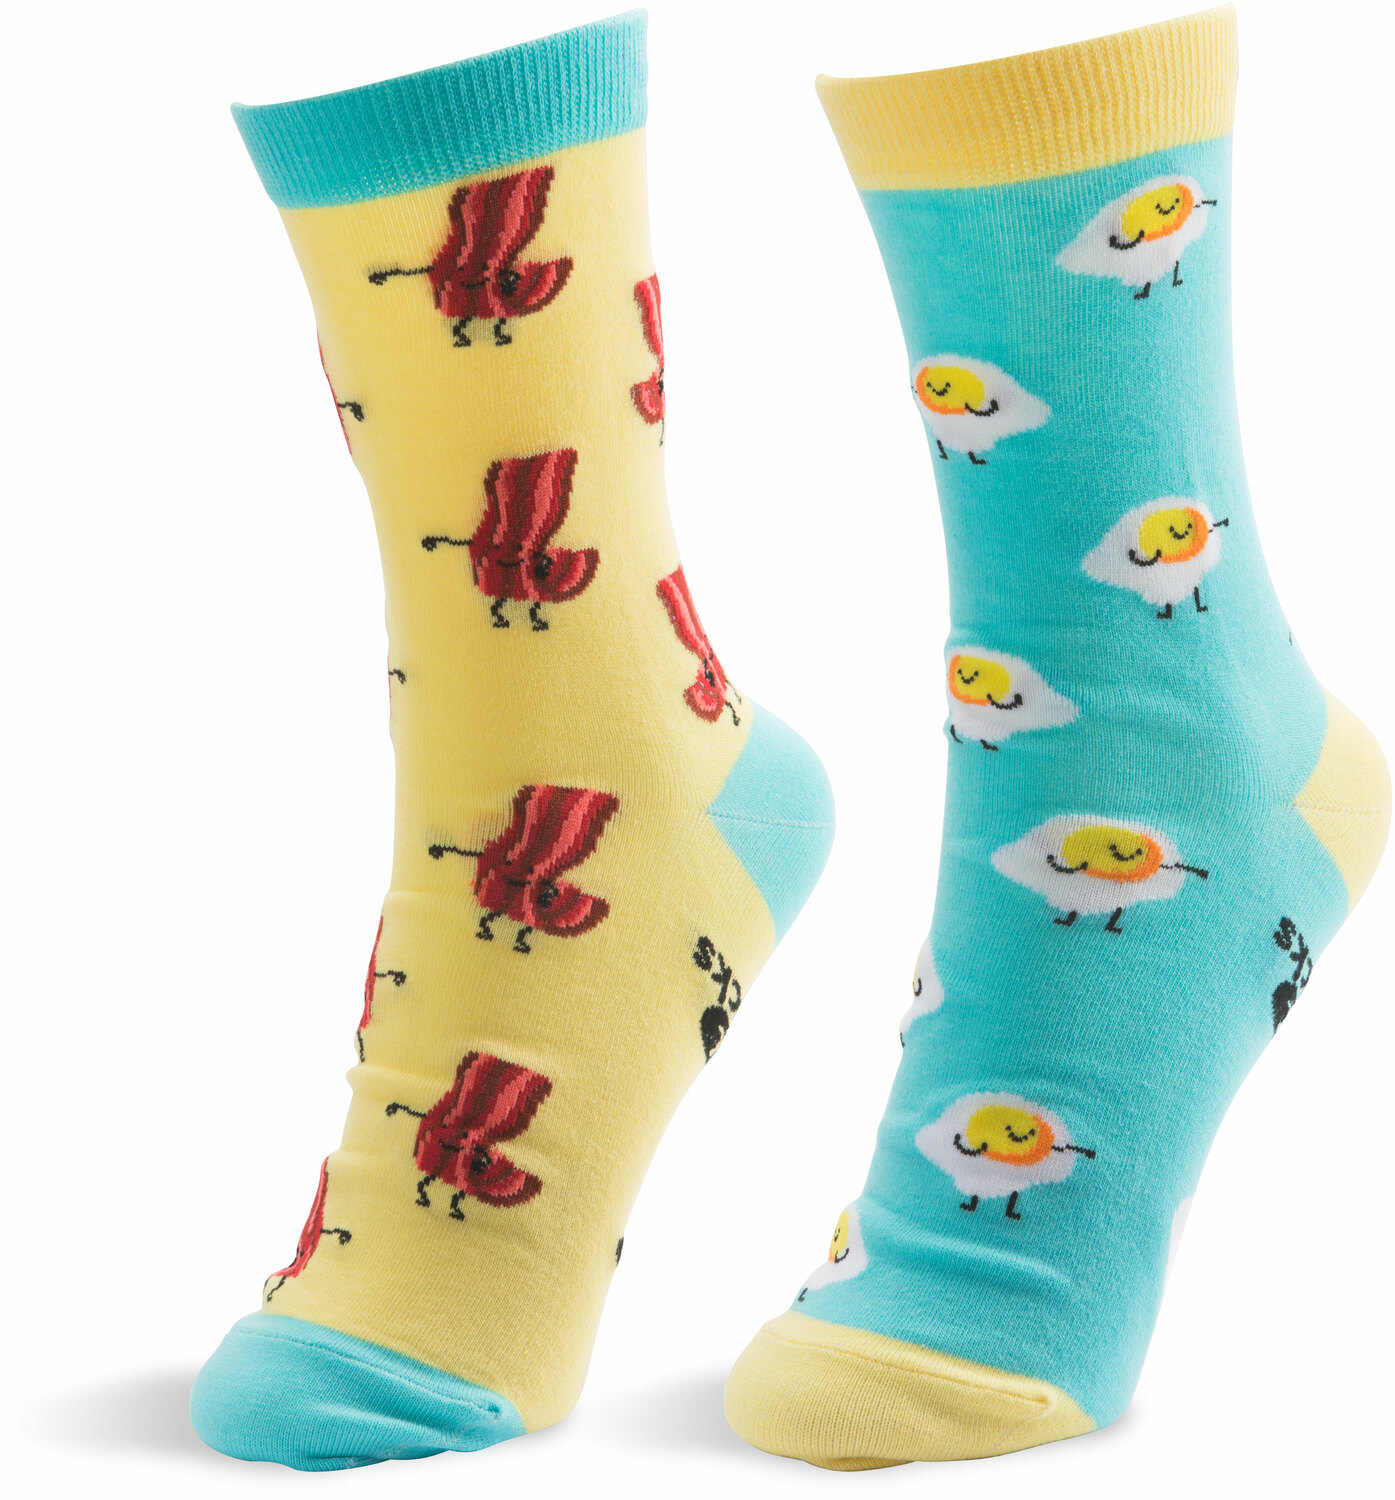 Bacon and Eggs by Late Night Snacks - Bacon and Eggs - S/M Unisex Socks